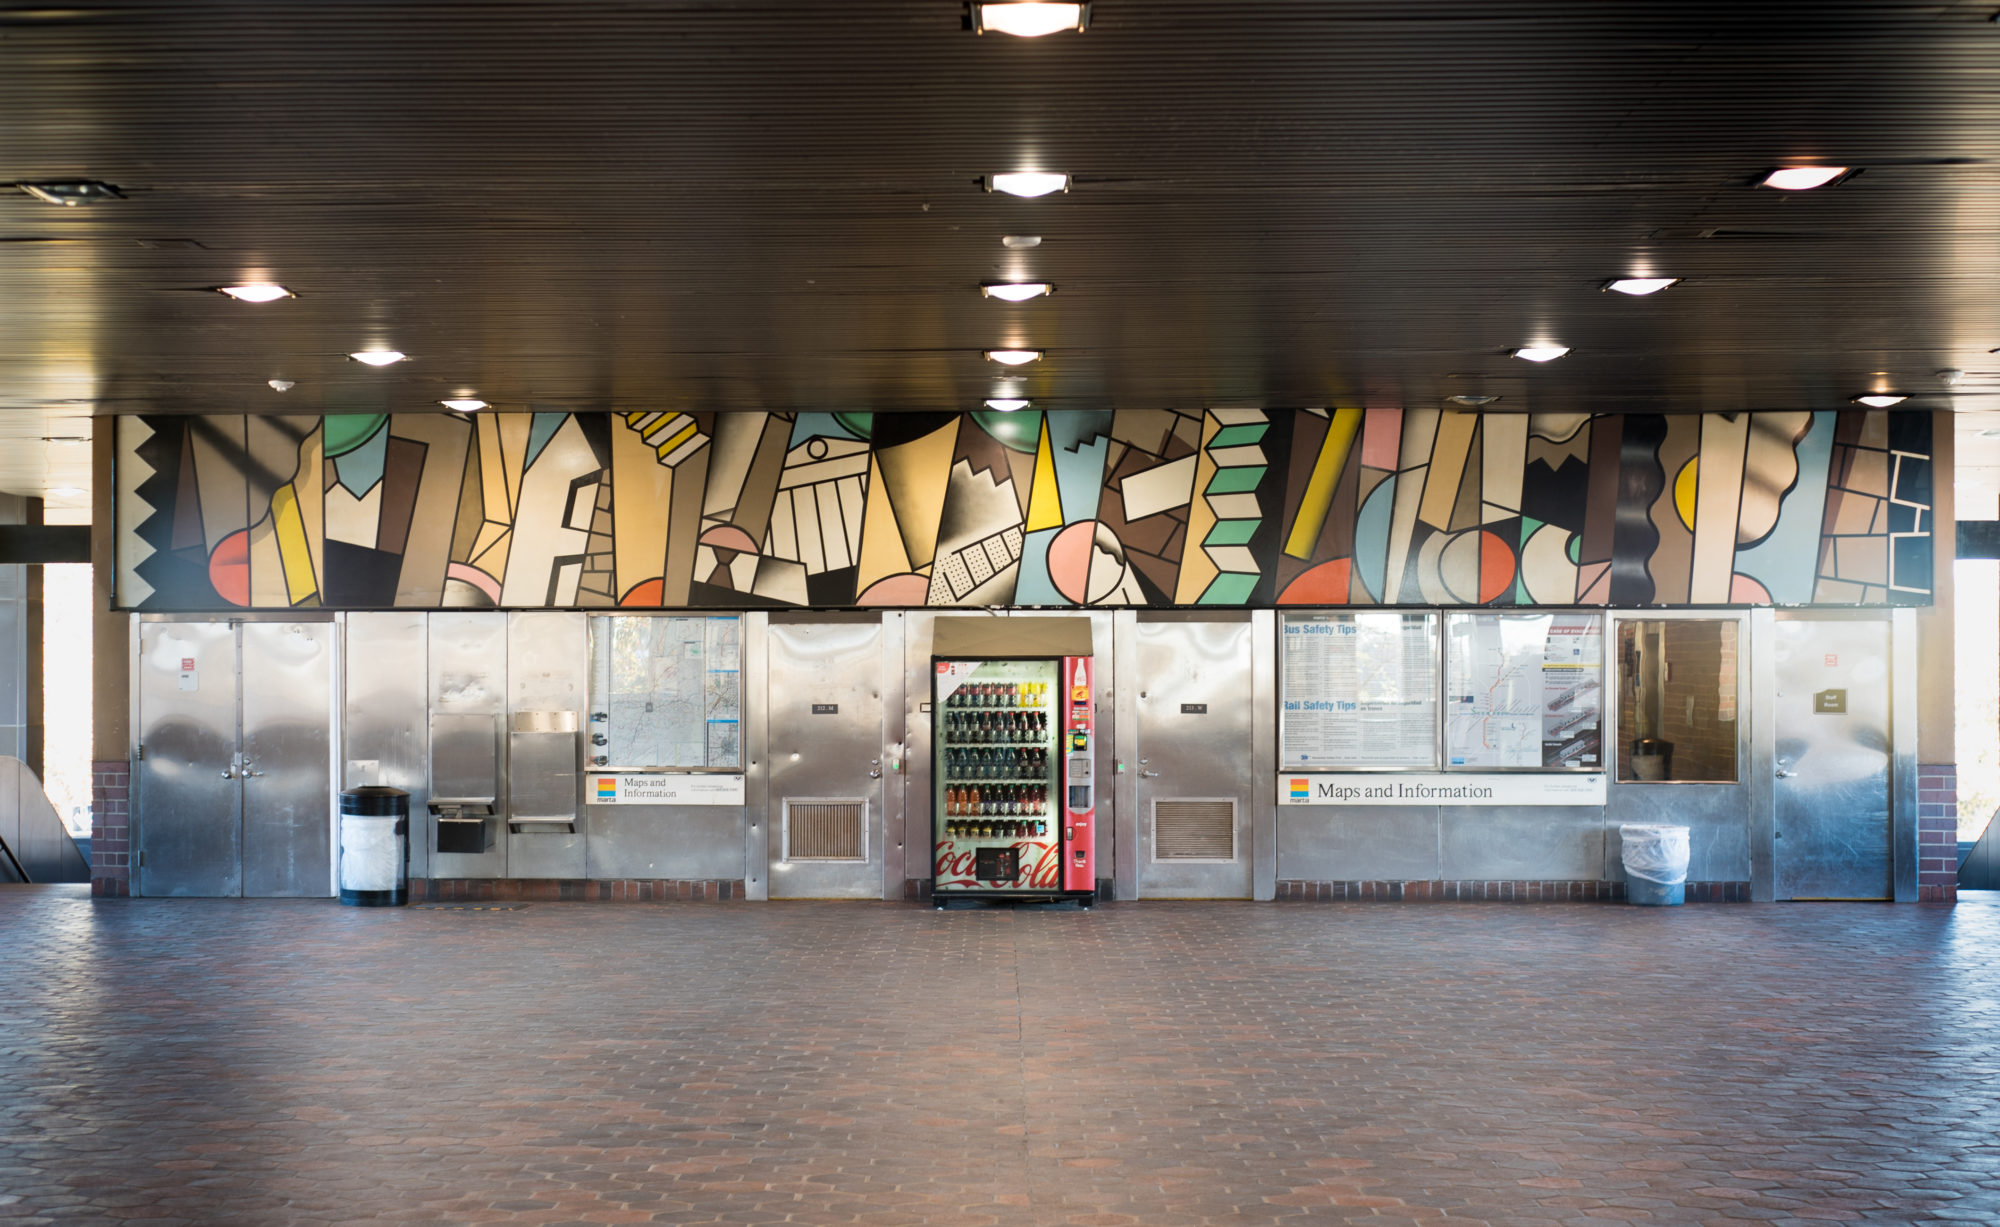 A colorful mural stretches along the ceiling, above the info desk and vending machine